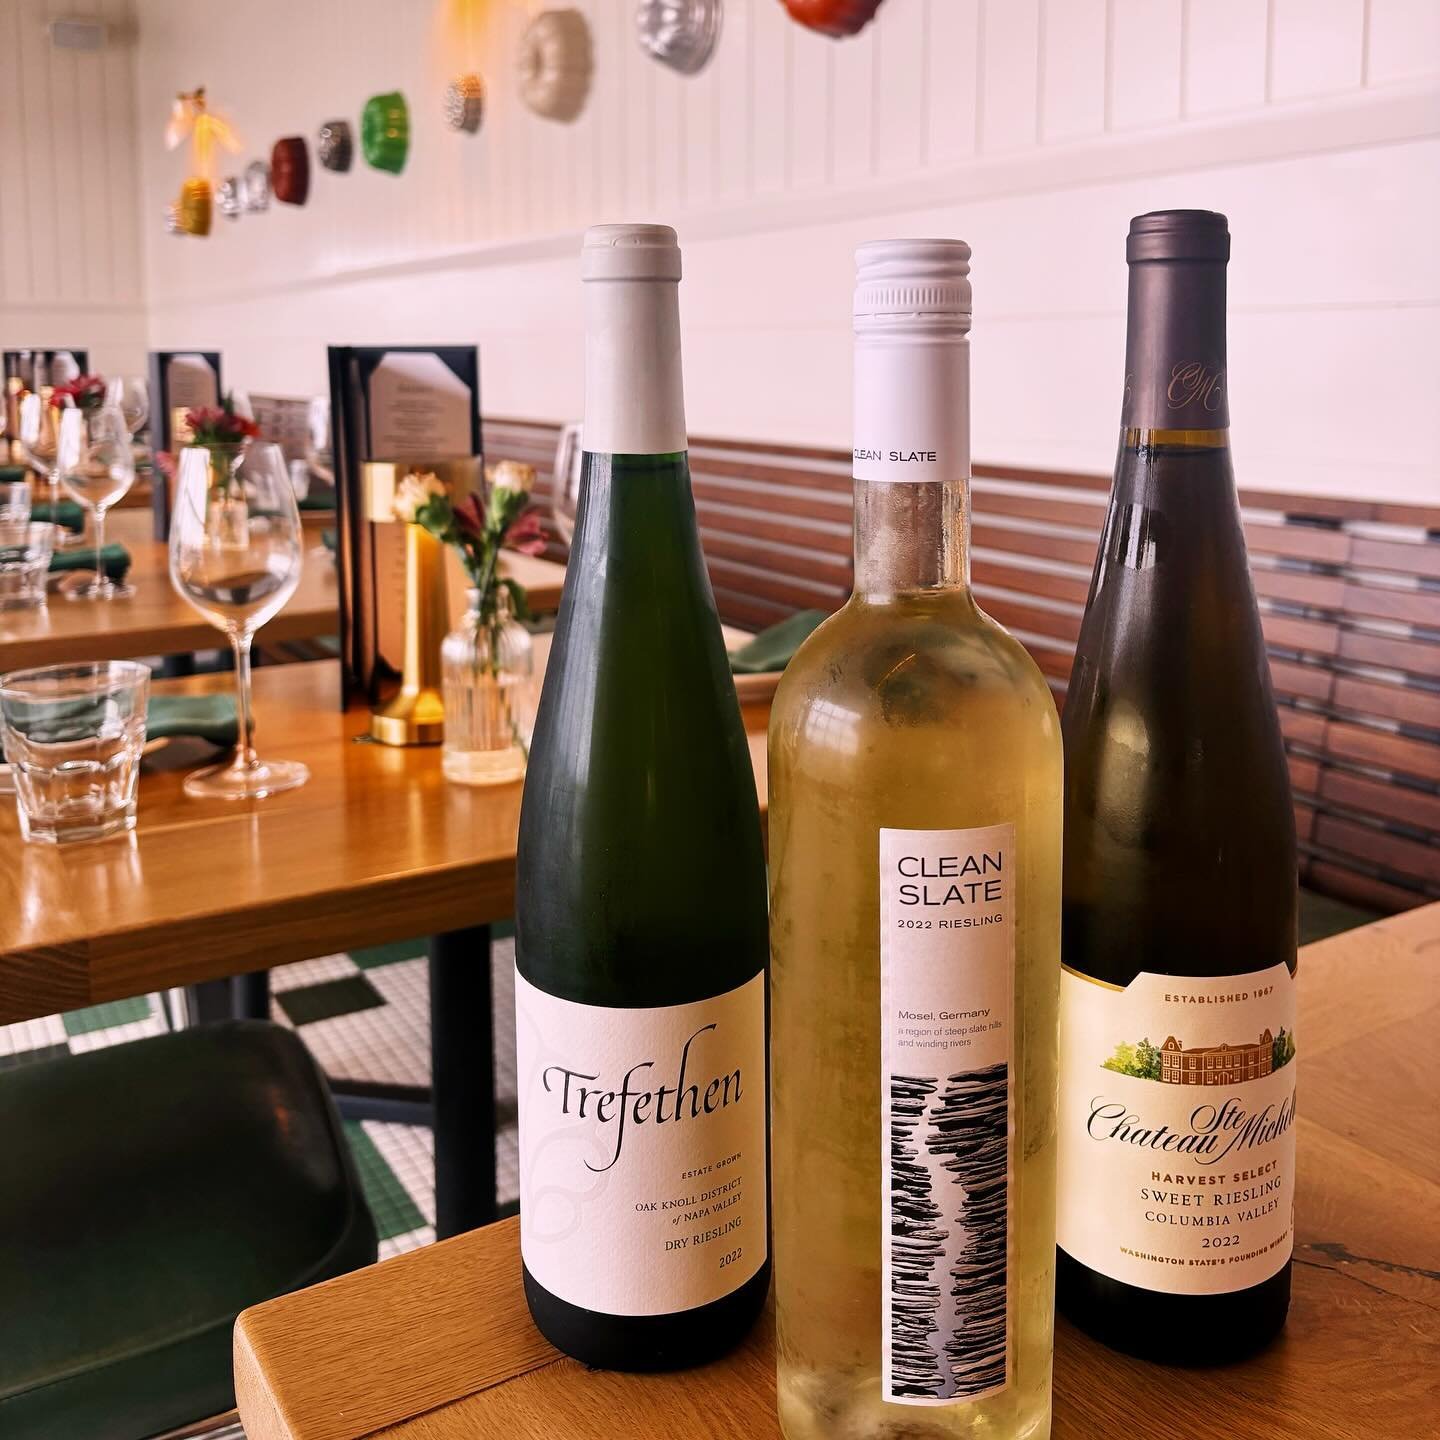 We&rsquo;ve teamed up with Southern Glazer&rsquo;s to bring you a truly unique experience in celebrating Riesling Month at Barrett&rsquo;s. Join us this weekend to taste our 3 glass flight:

Clean Slate - ripe peach, citrus, modern
Chateau Ste Michel